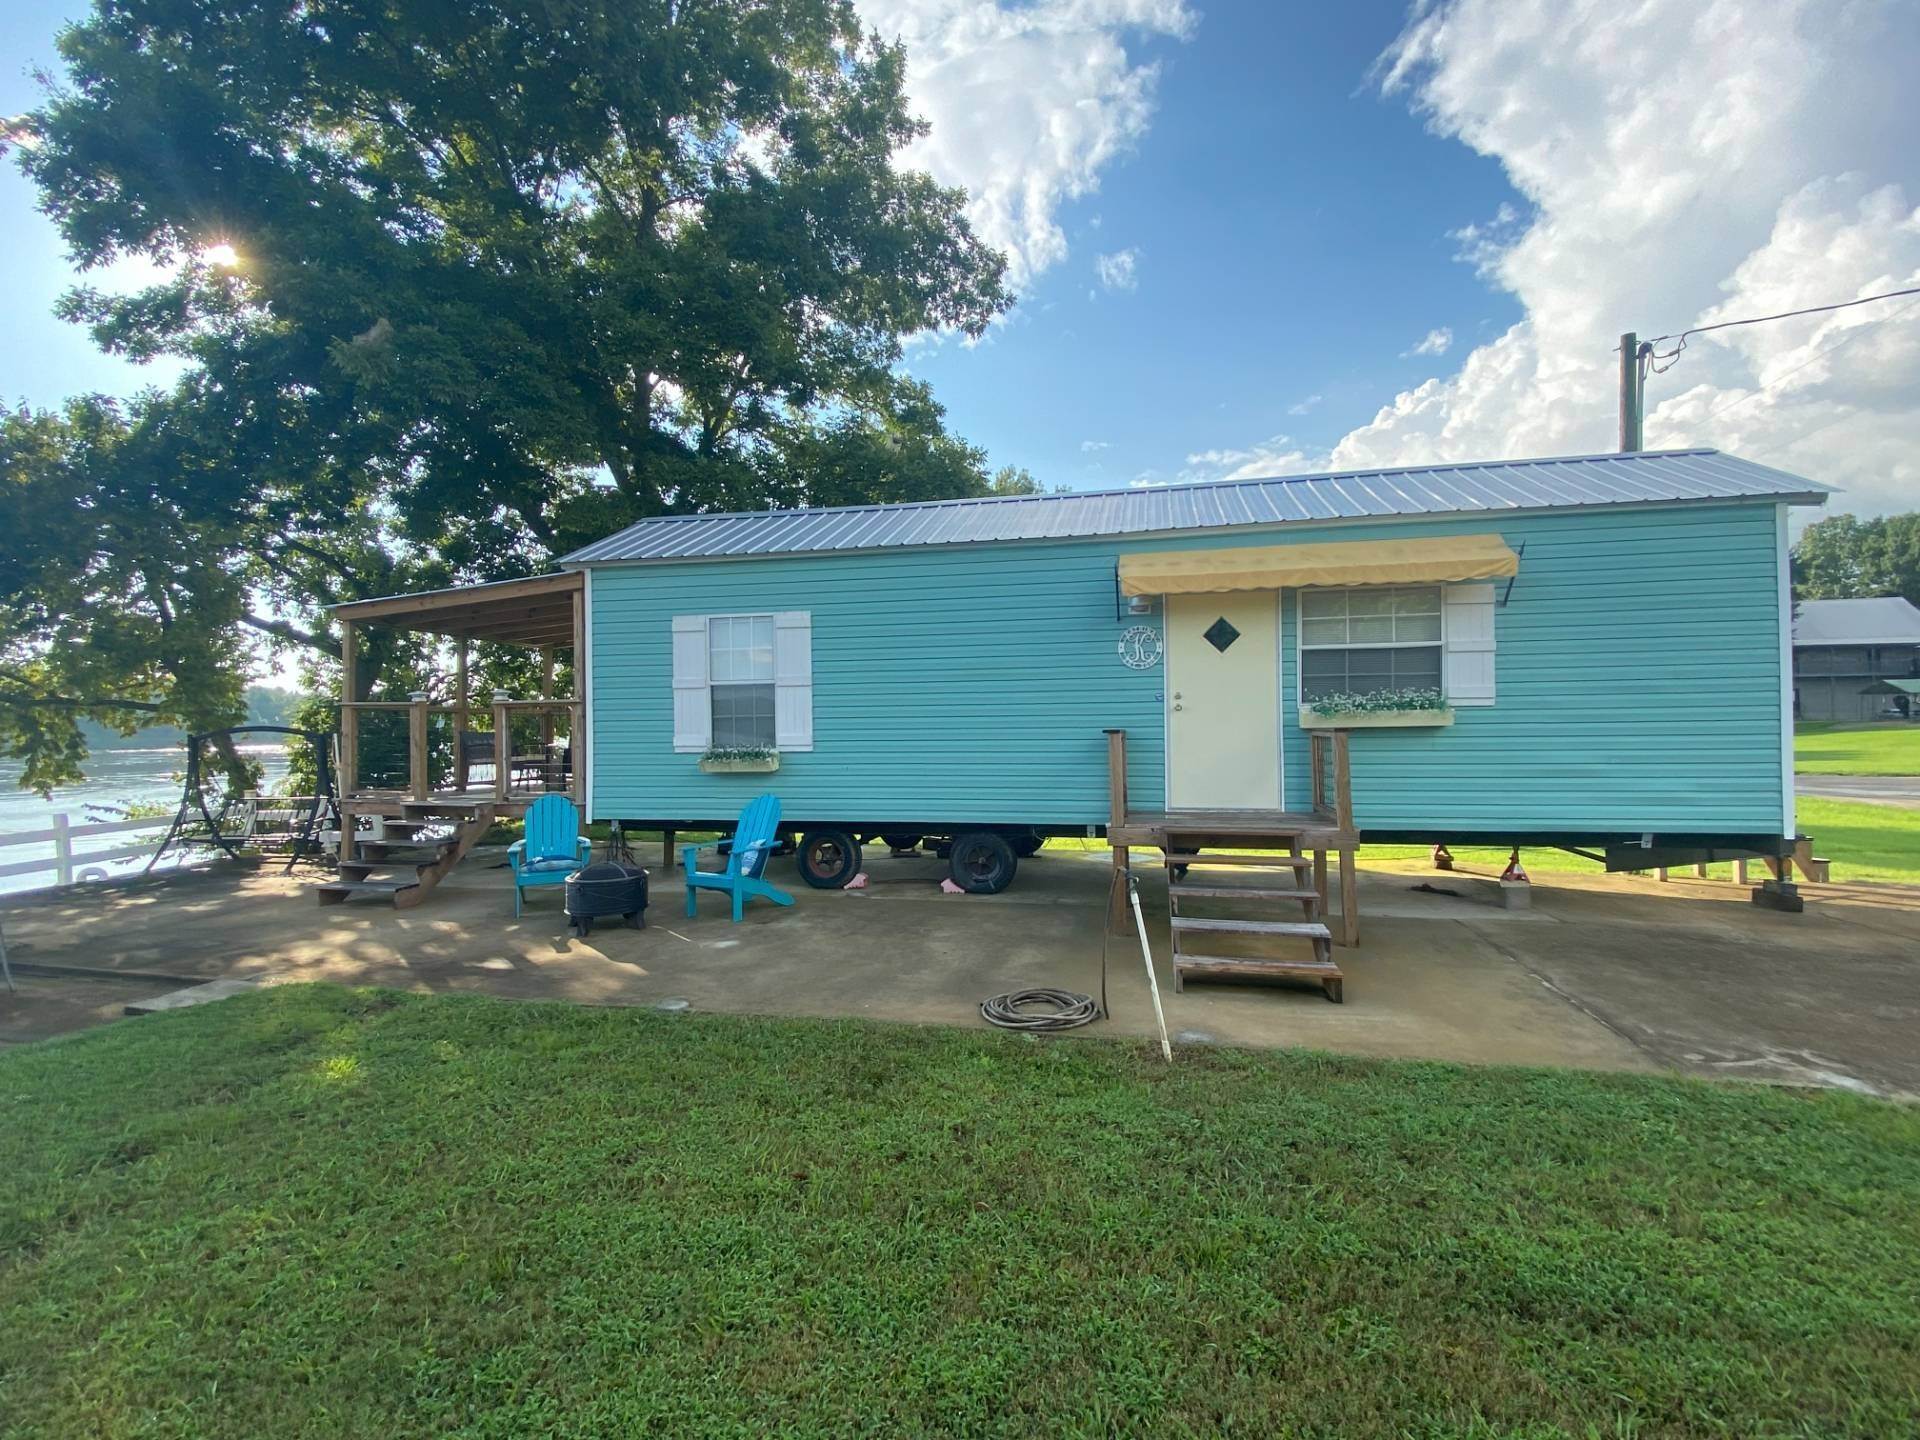 4. Mobile Home for Sale at Clifton, TN 38425